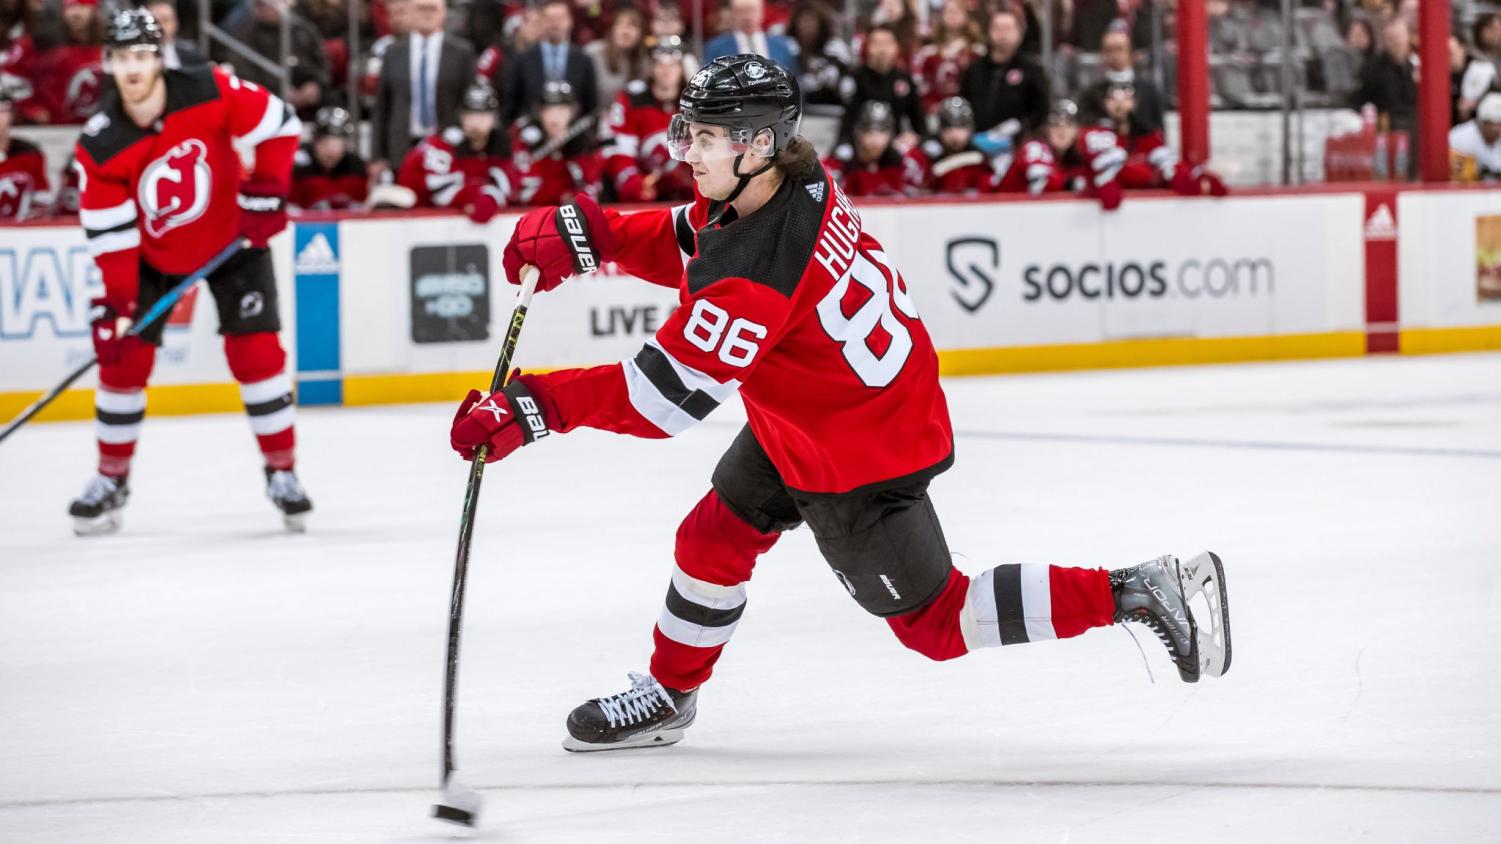 The New Jersey Devils Have a Chance to Surprise - The Hockey News